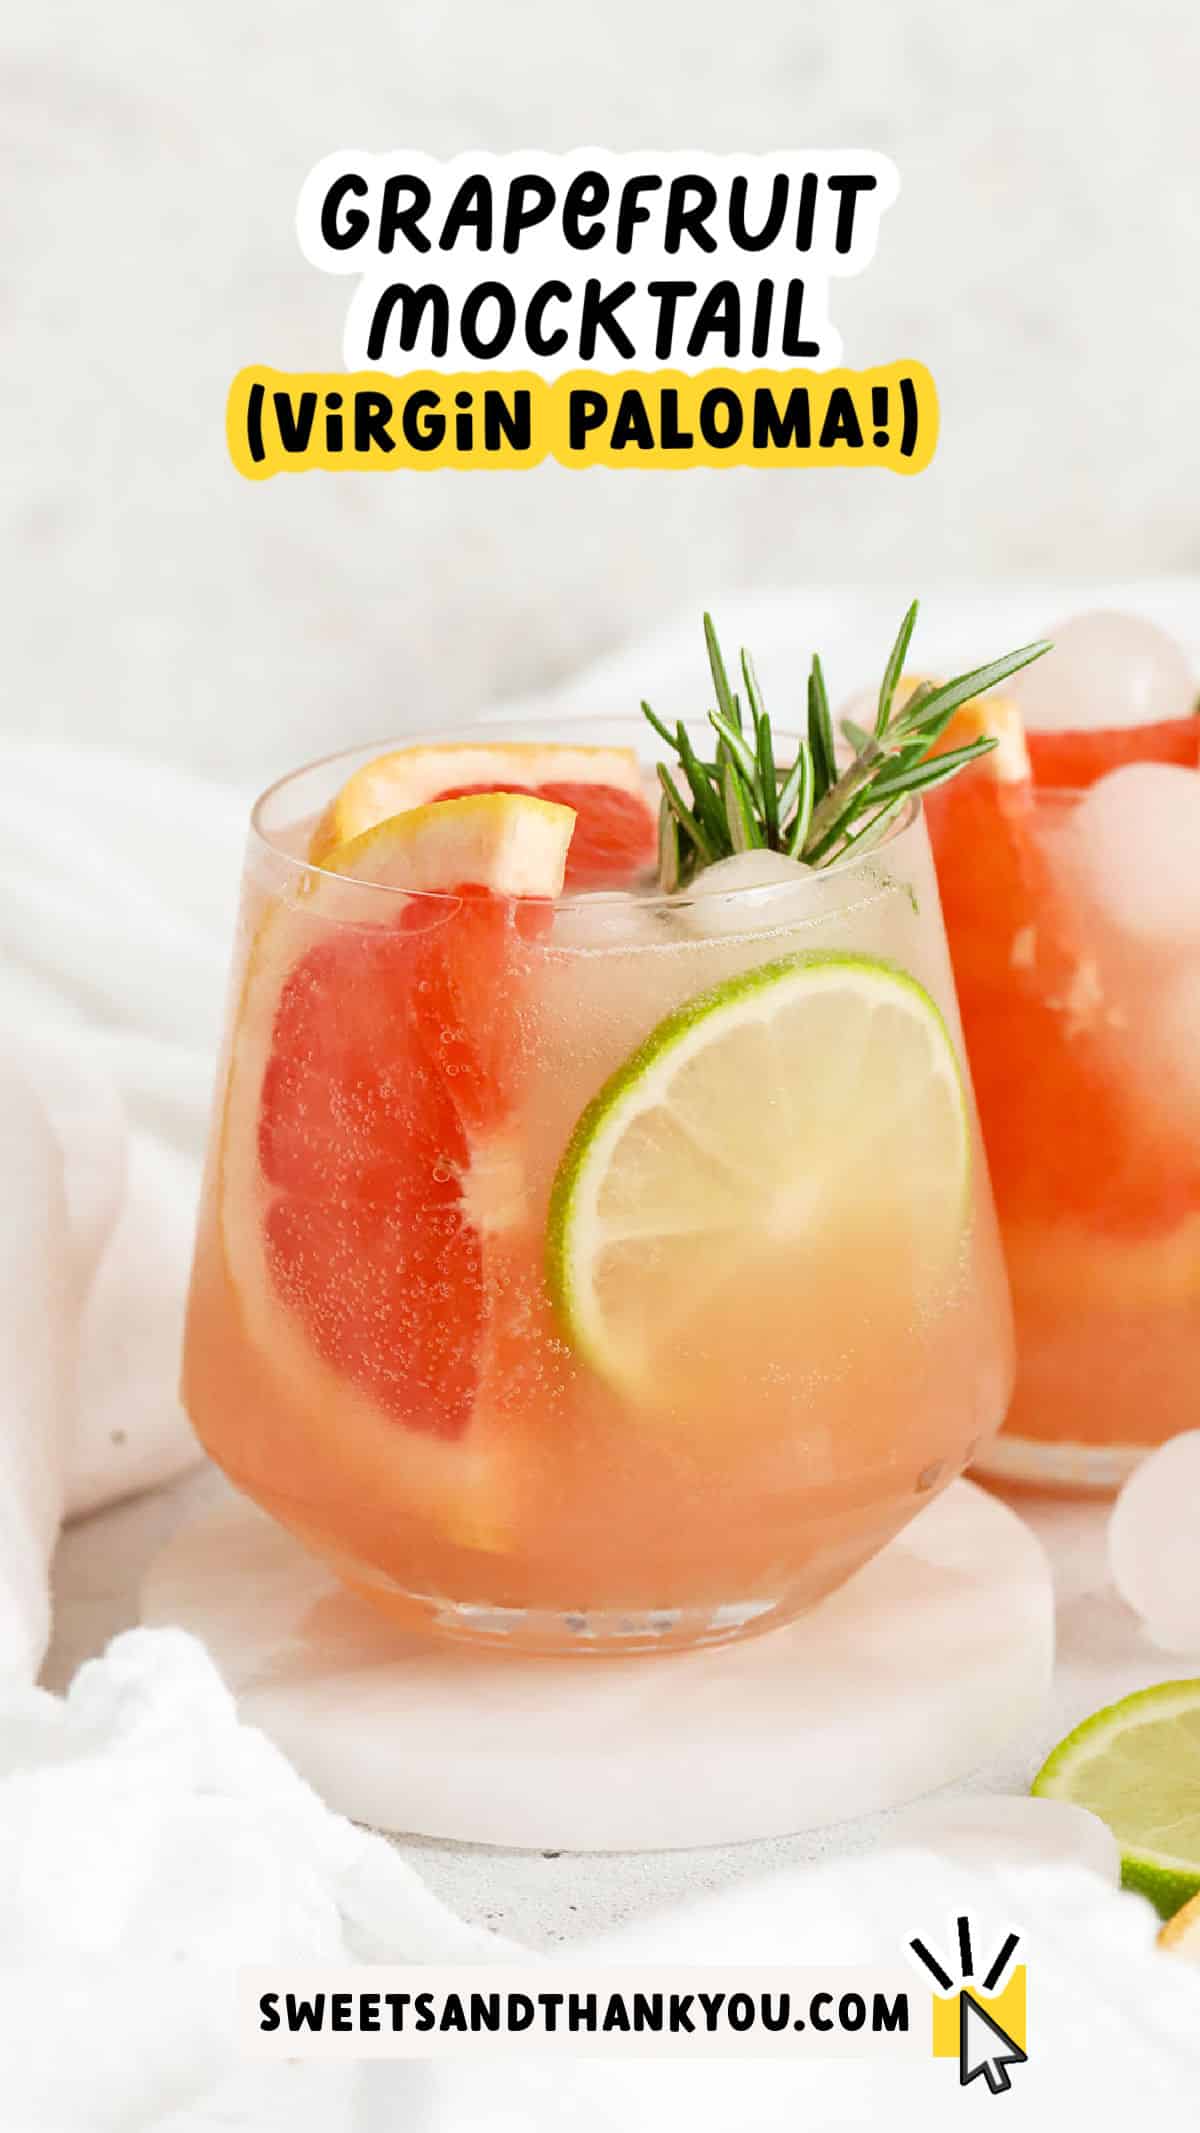 Let's make a Grapefruit Mocktail! This virgin paloma is the perfect blend of citrus & sparkle. You'll love the fresh flavor! A non-alcoholic paloma recipe like this makes a PERFECT holiday mocktail or party drink. Beyond the gorgeous pink color and light flavor, this easy mocktail recipe is EASY to make and looks elegant and sophisticated without a lot of fuss. (One secret: the rosemary simple syrup!) Get this mocktail recipe and our favorite garnishes at Sweets & Thank You